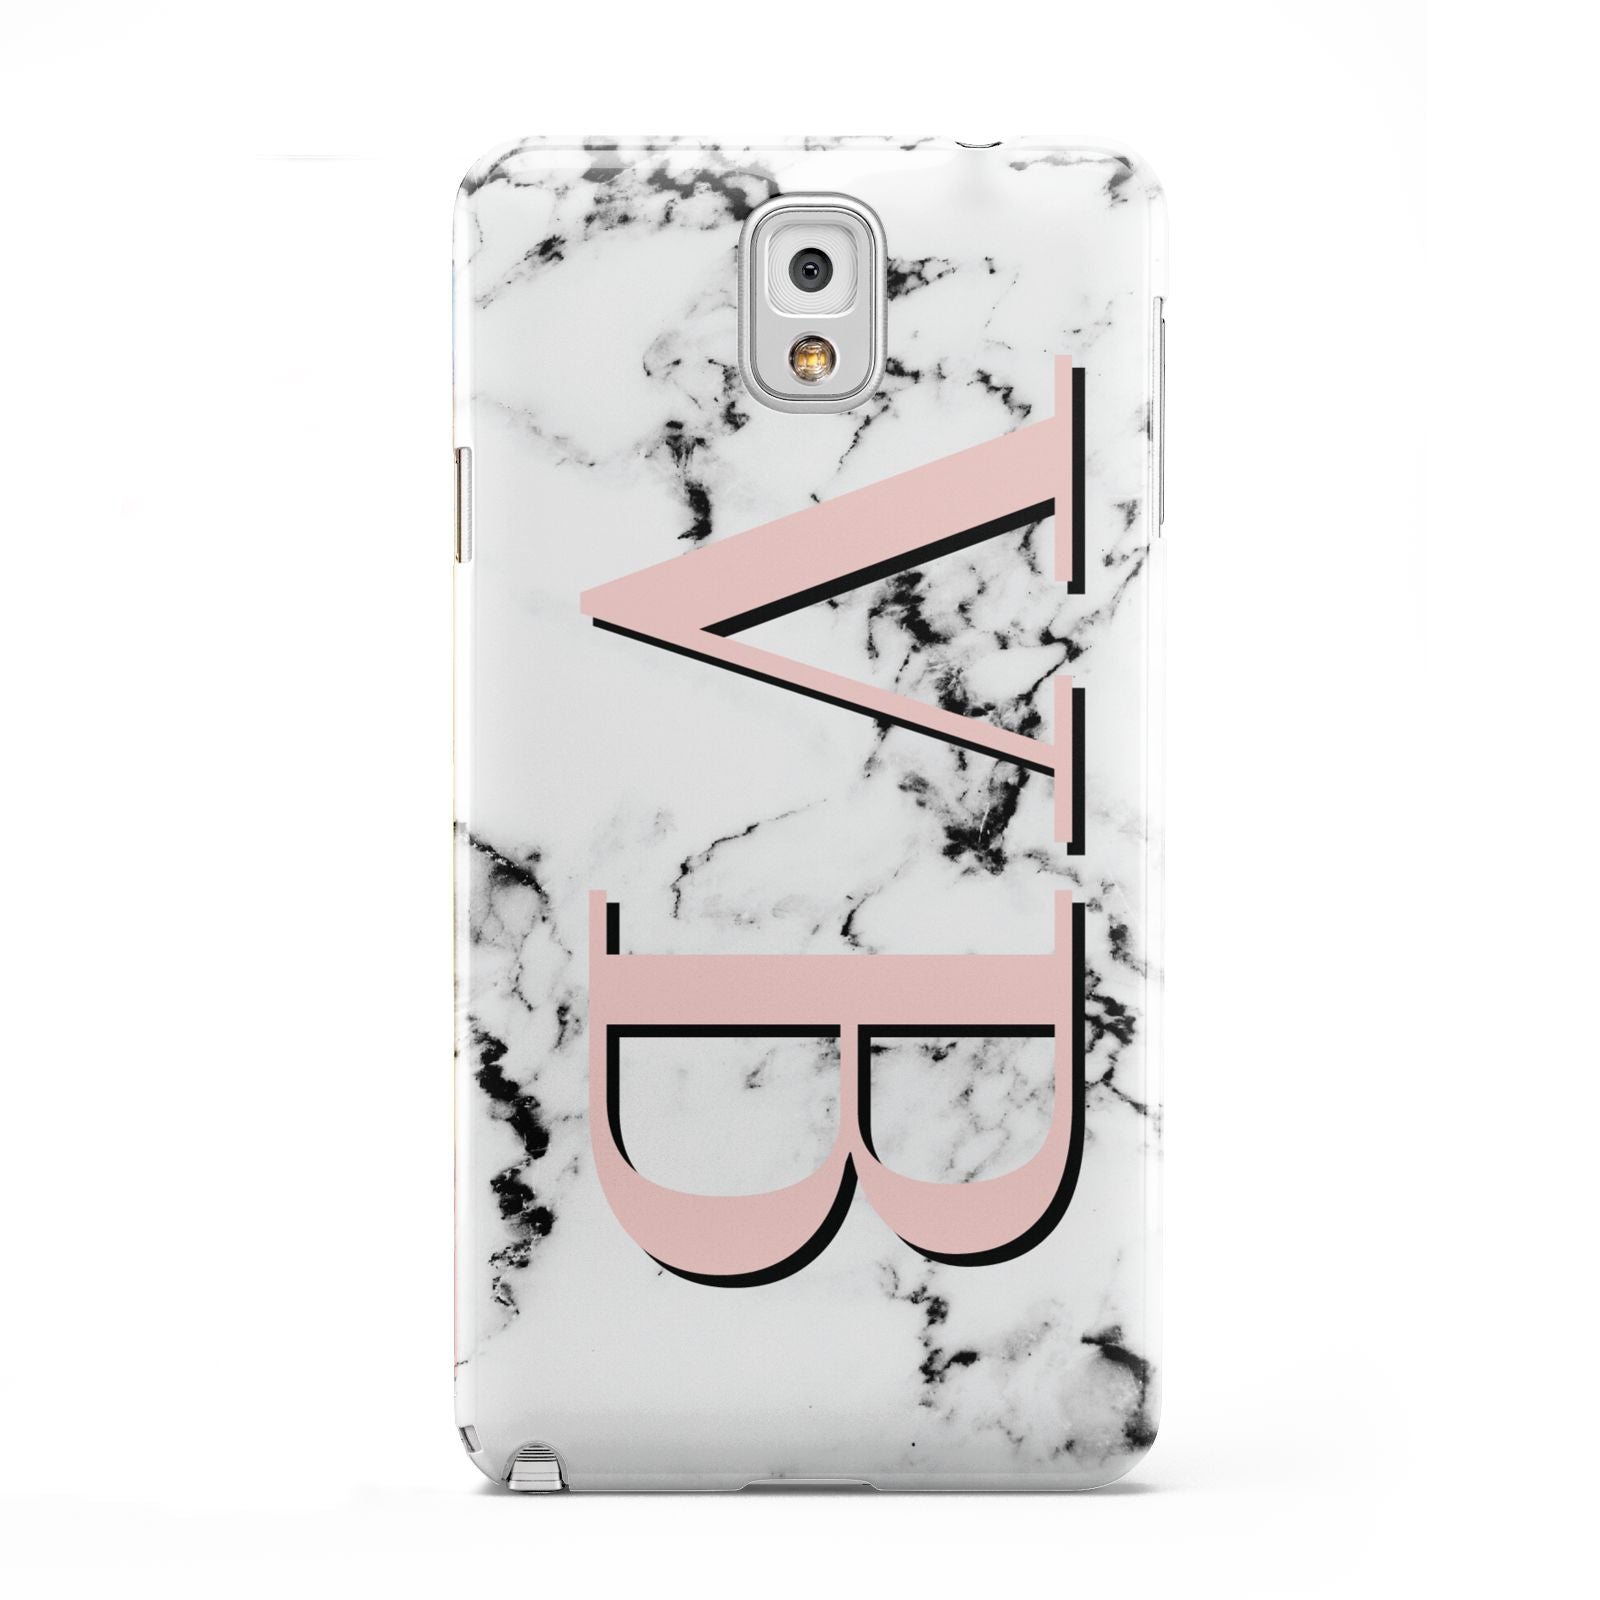 Personalised Coral Malble Initials Samsung Galaxy Note 3 Case